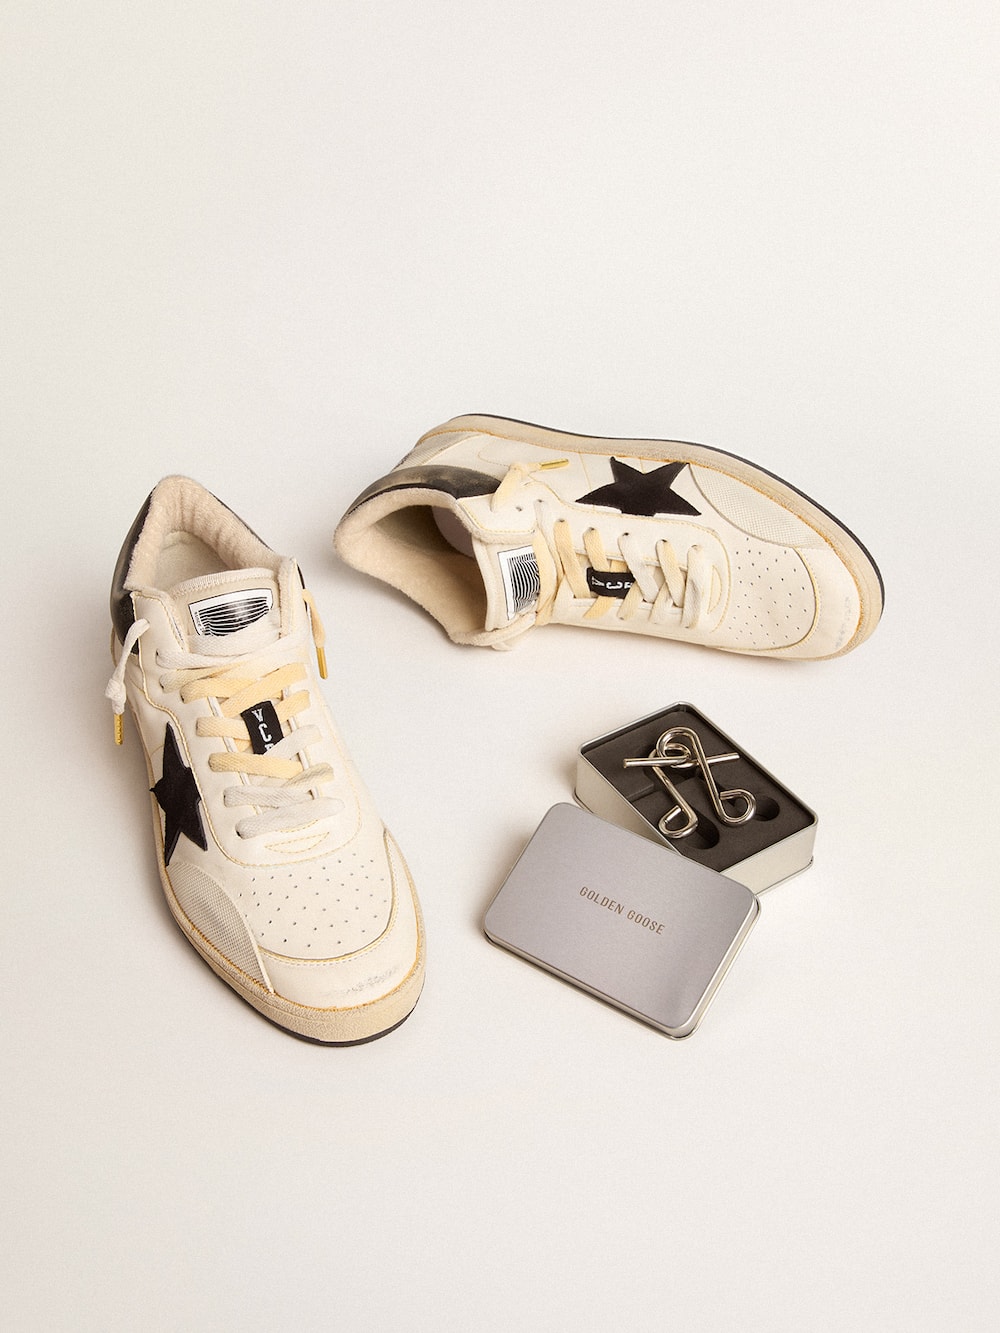 Golden Goose - Men’s Ball Star Pro Mid in aged white leather with black star in 